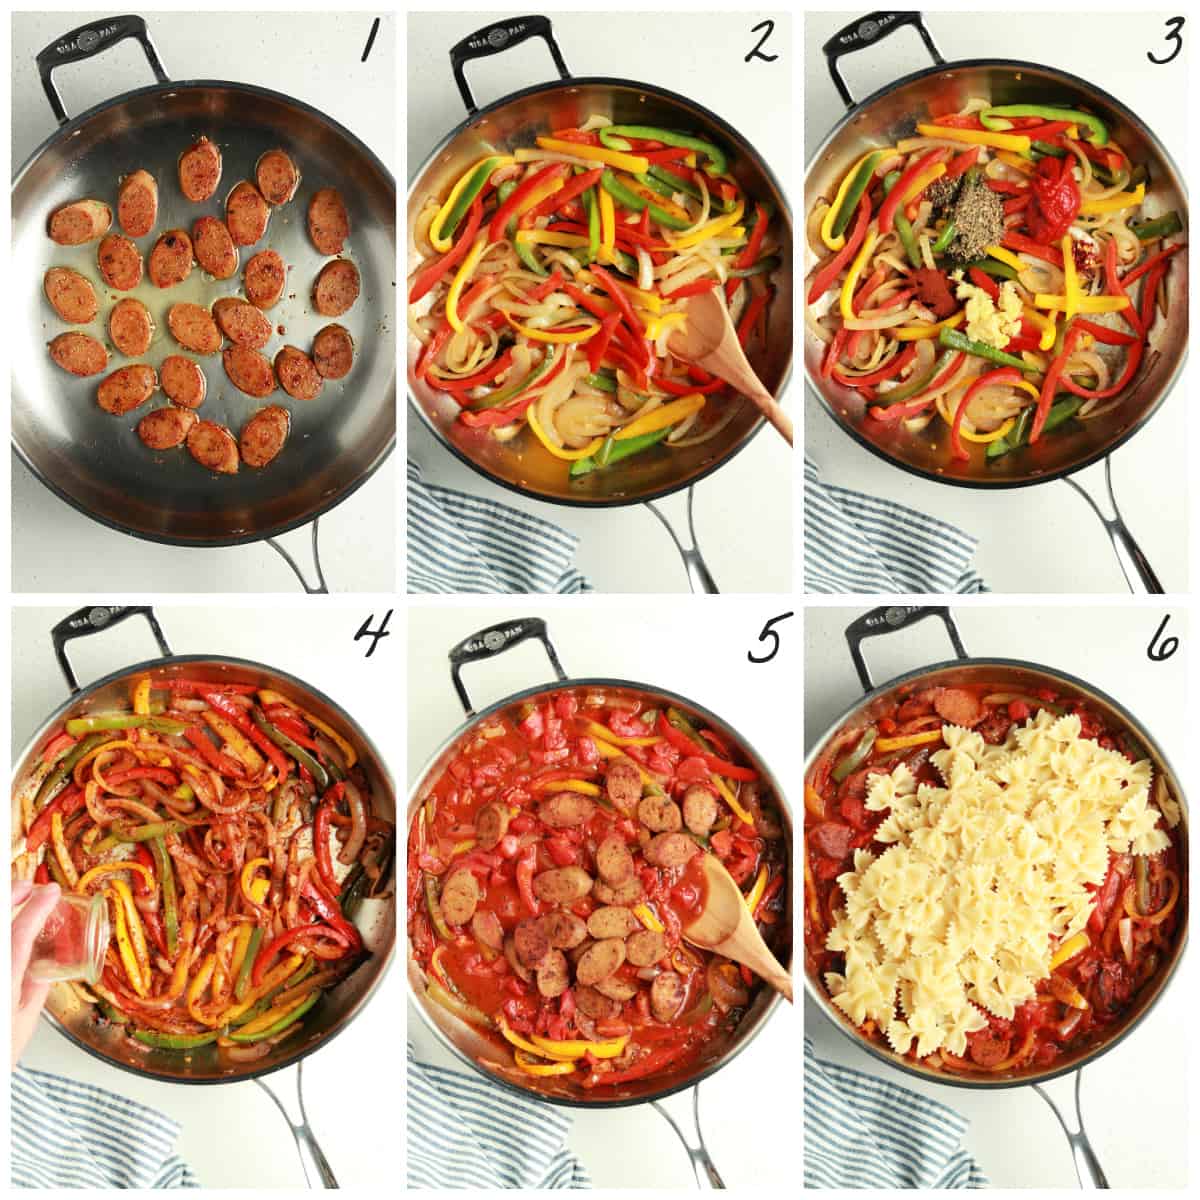 Six process photos showing the sausage being browned, sautéing the onions and peppers, adding sauce and pasta. 